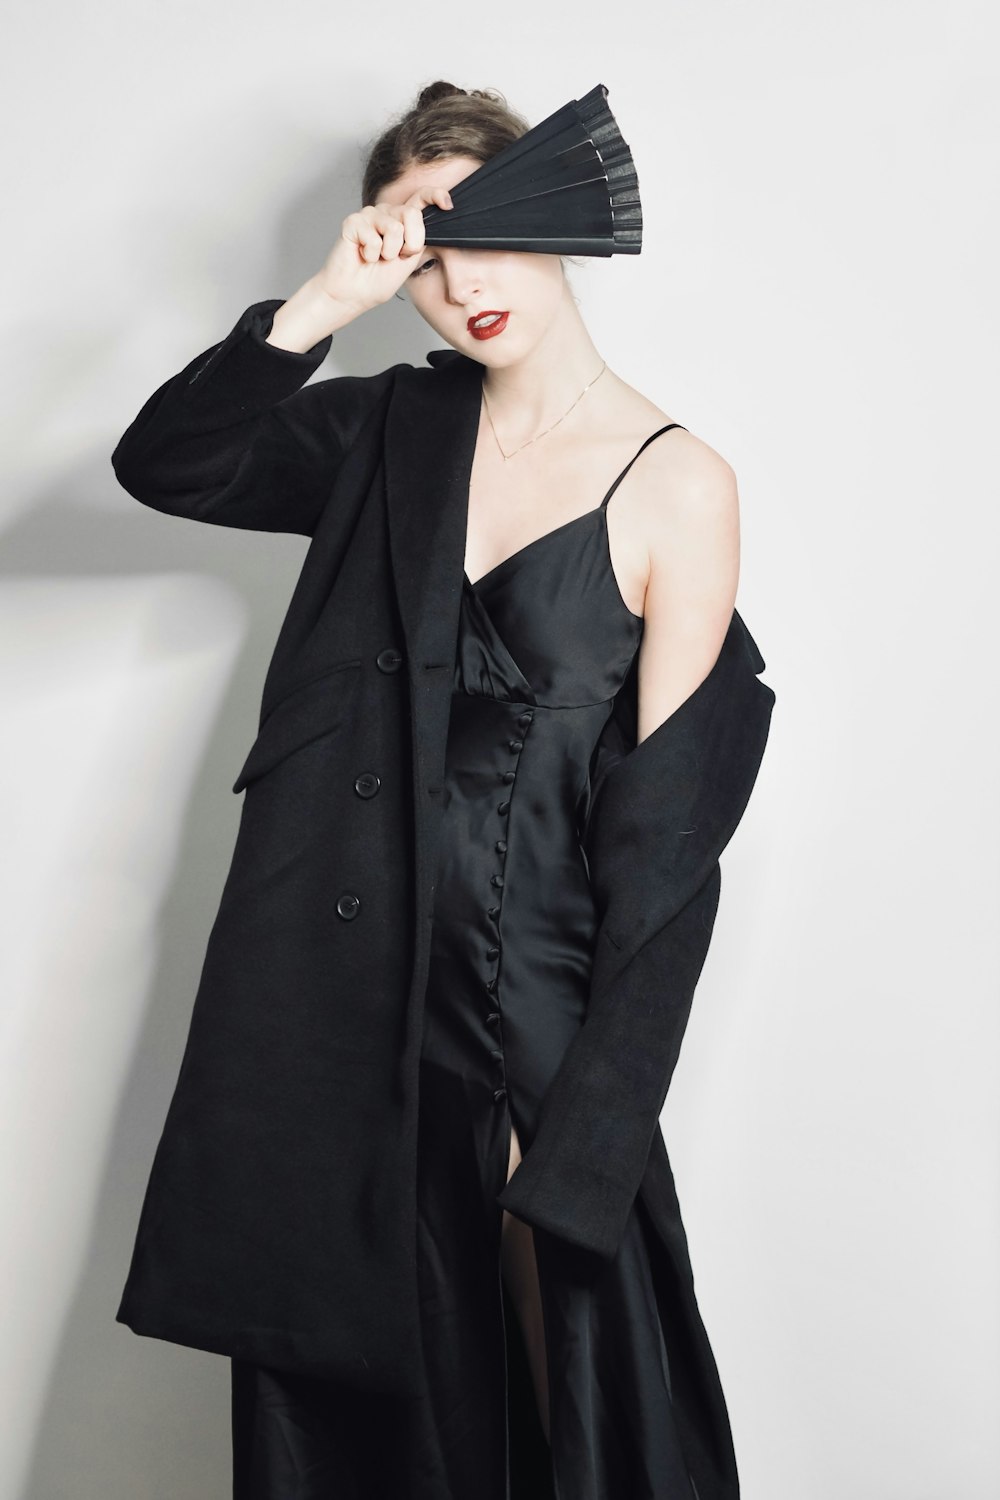 a woman in a black dress and a black hat